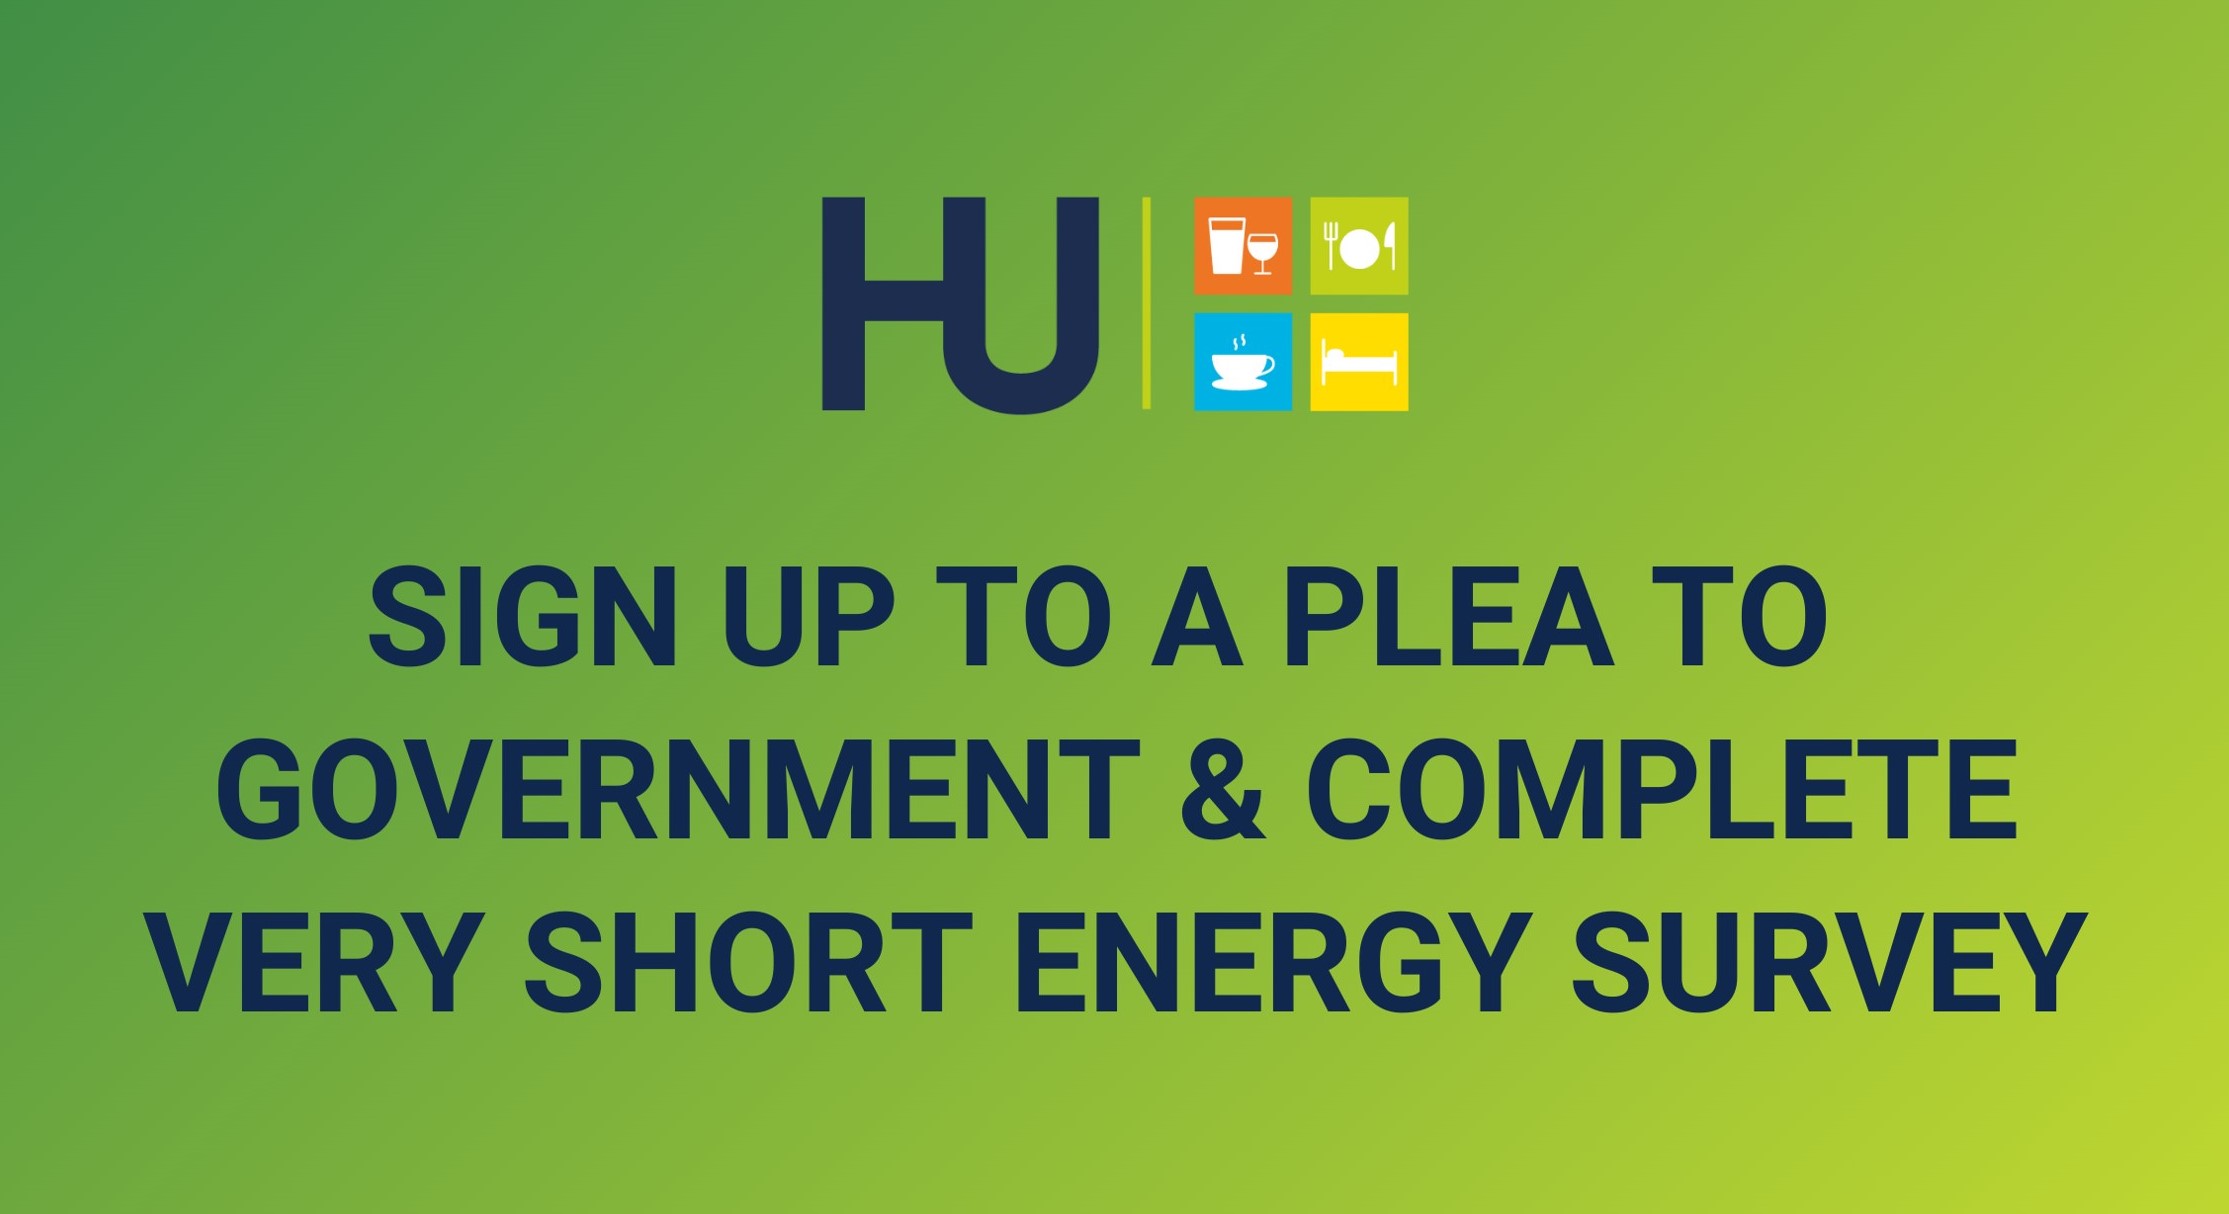 SIGN UP TO A PLEA TO UK GOV AND COMPLETE VERY SHORT ENERGY SURVEY